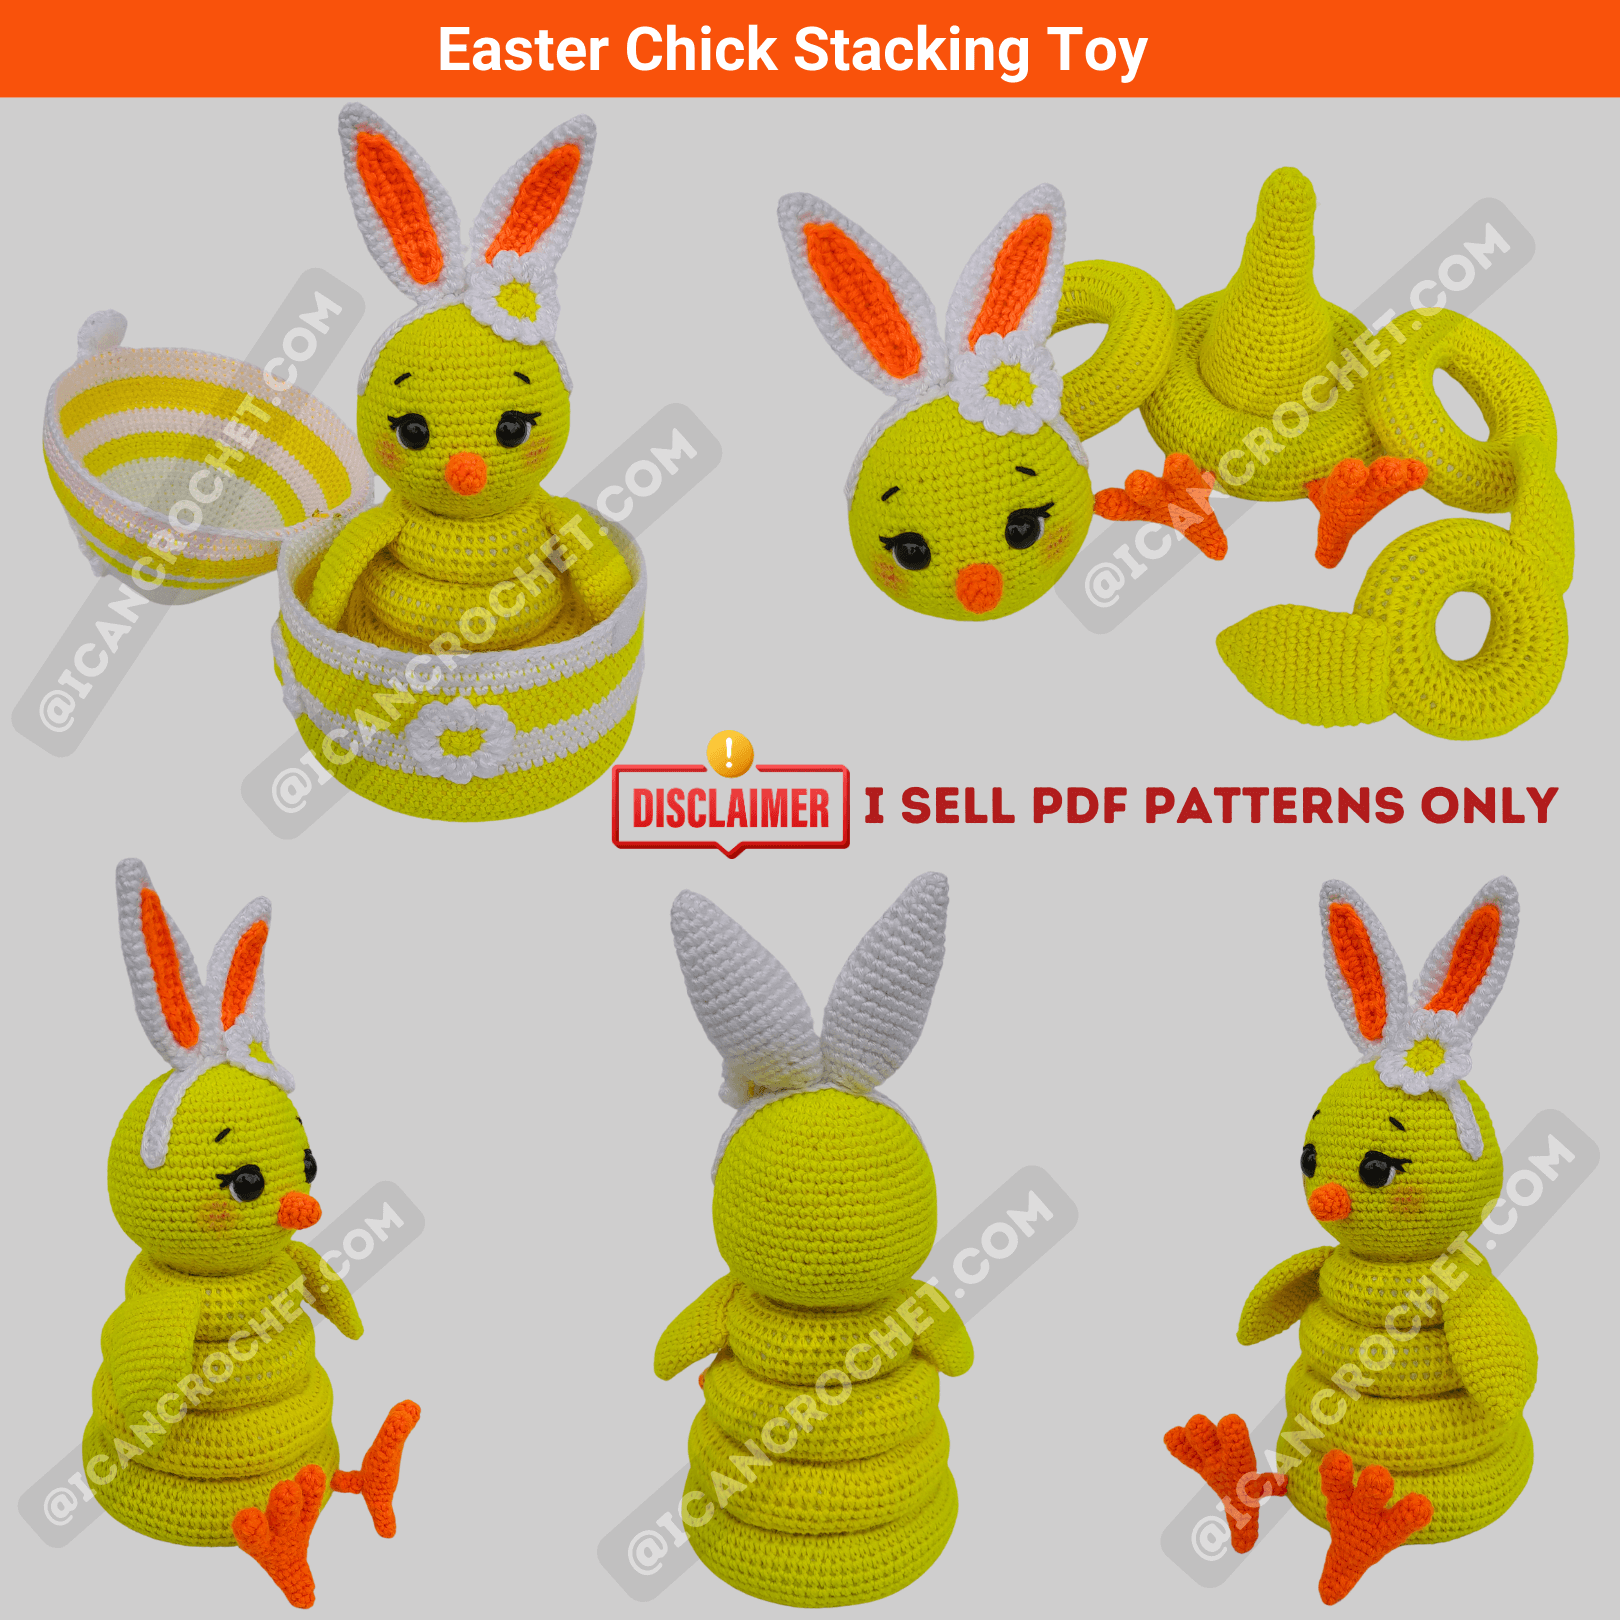 Easter Chick with egg crochet toy pattern